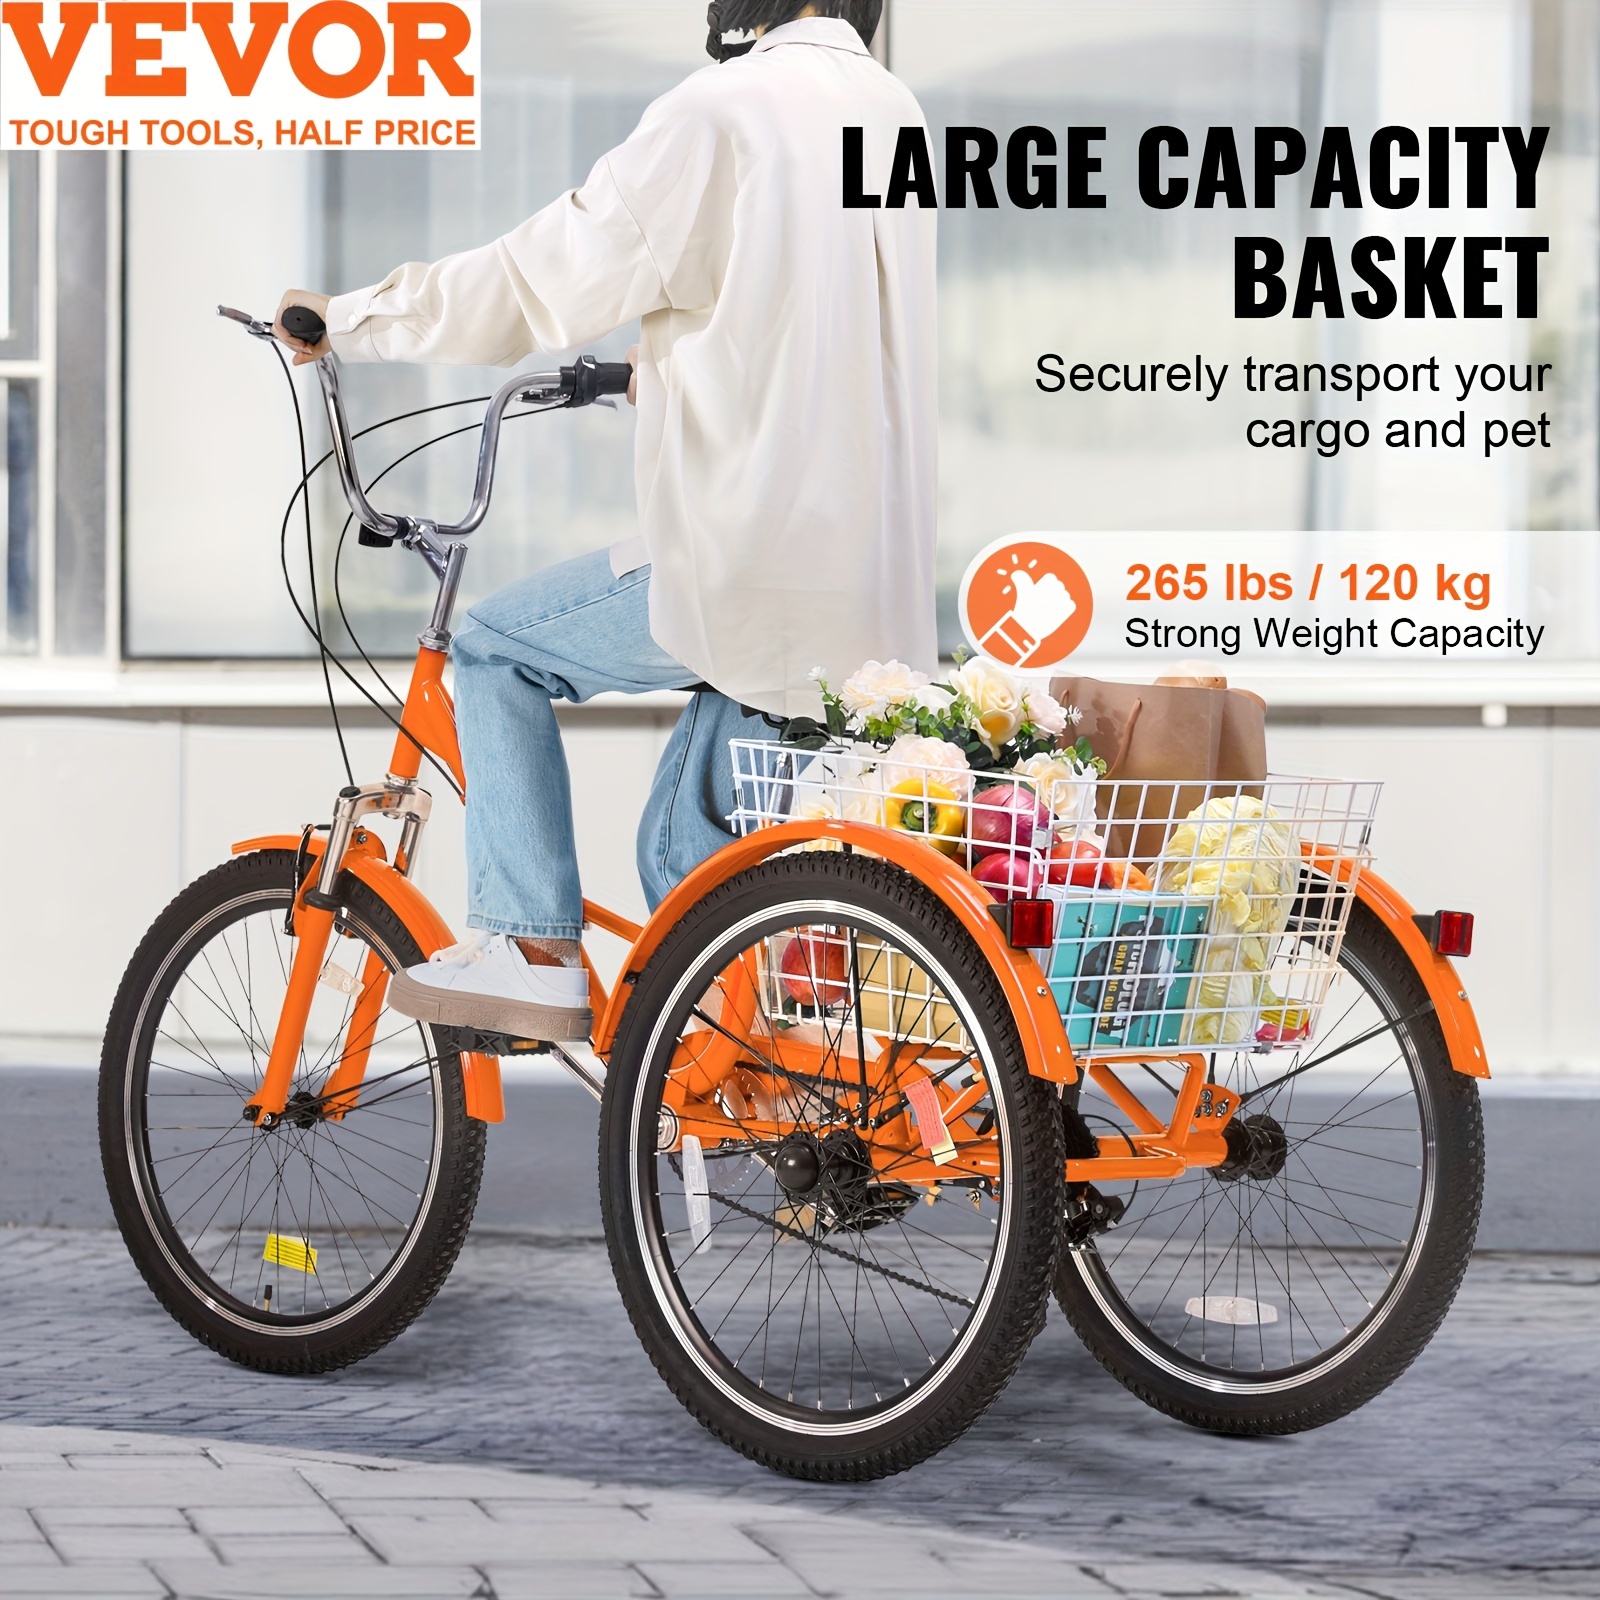 

24" Adult Folding Tricycle 7 Speed, Carbon Steel 3 Wheel Bikes 1 Speed Trikes With Shopping Basket For Seniors Adult, Orange